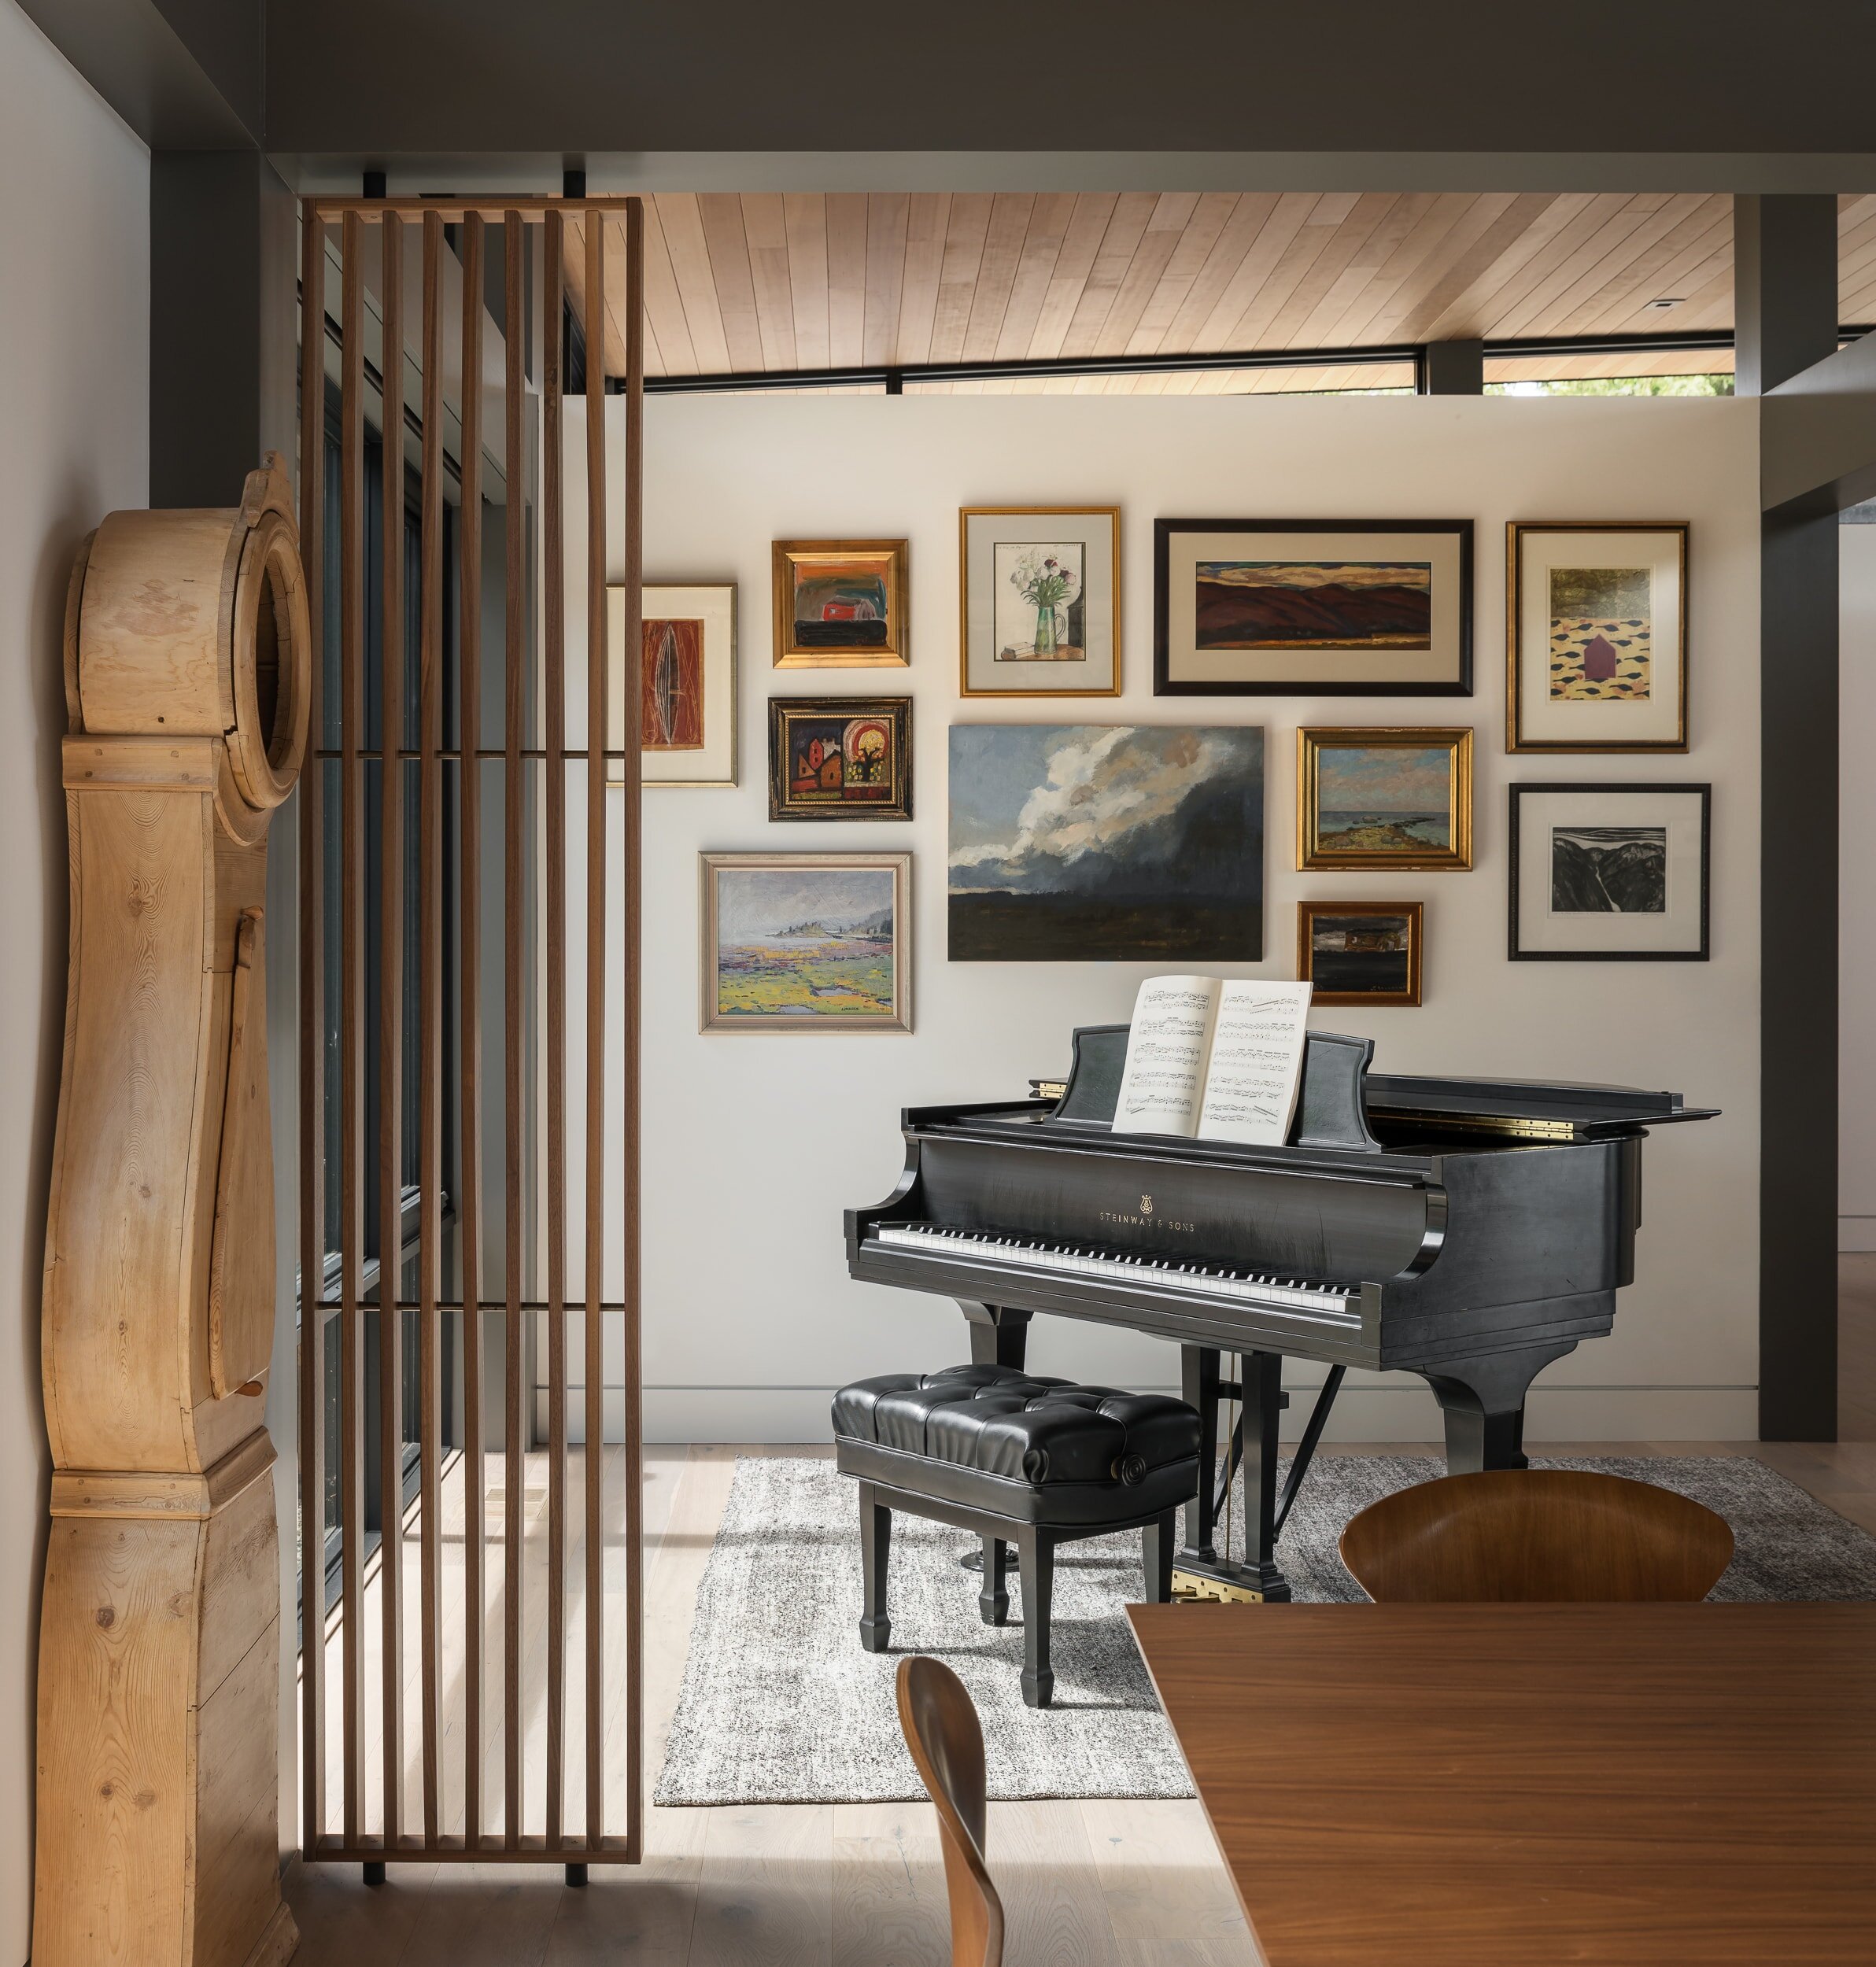 remodeled music room with grand piano as centerpiece surrounded by art